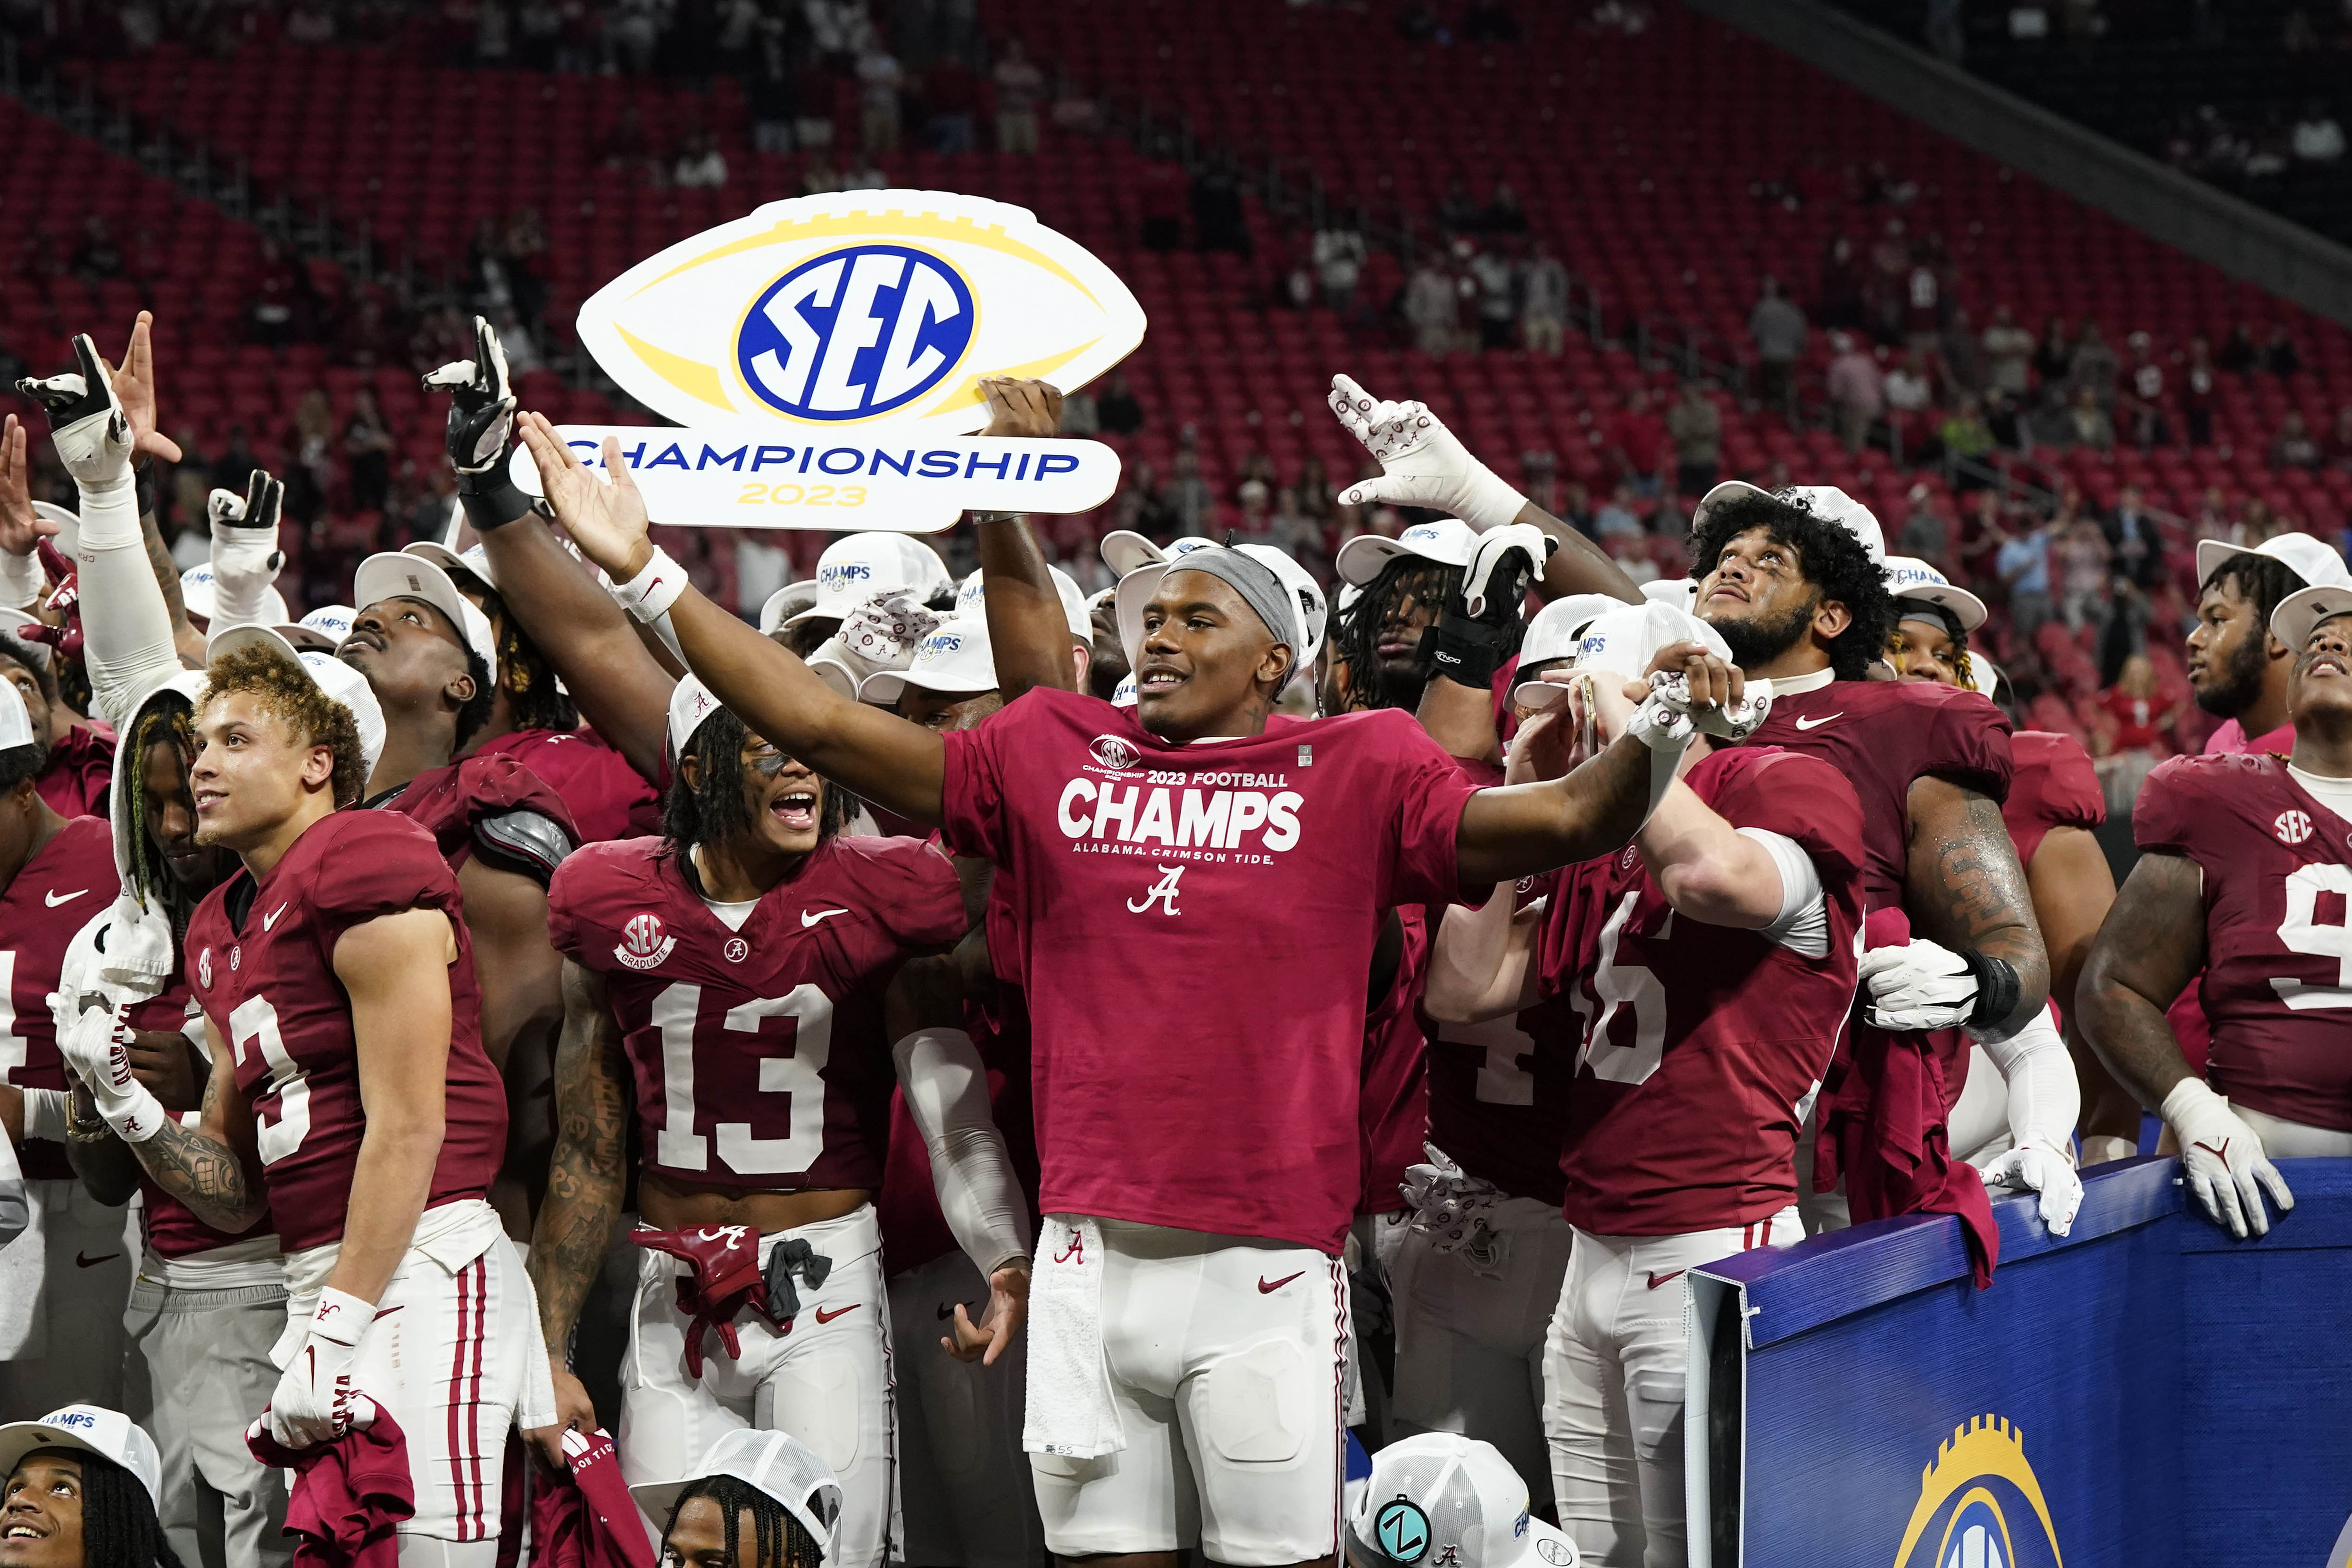 Alabama players stand and celebrate as they hold up an SEC CHampionship sign